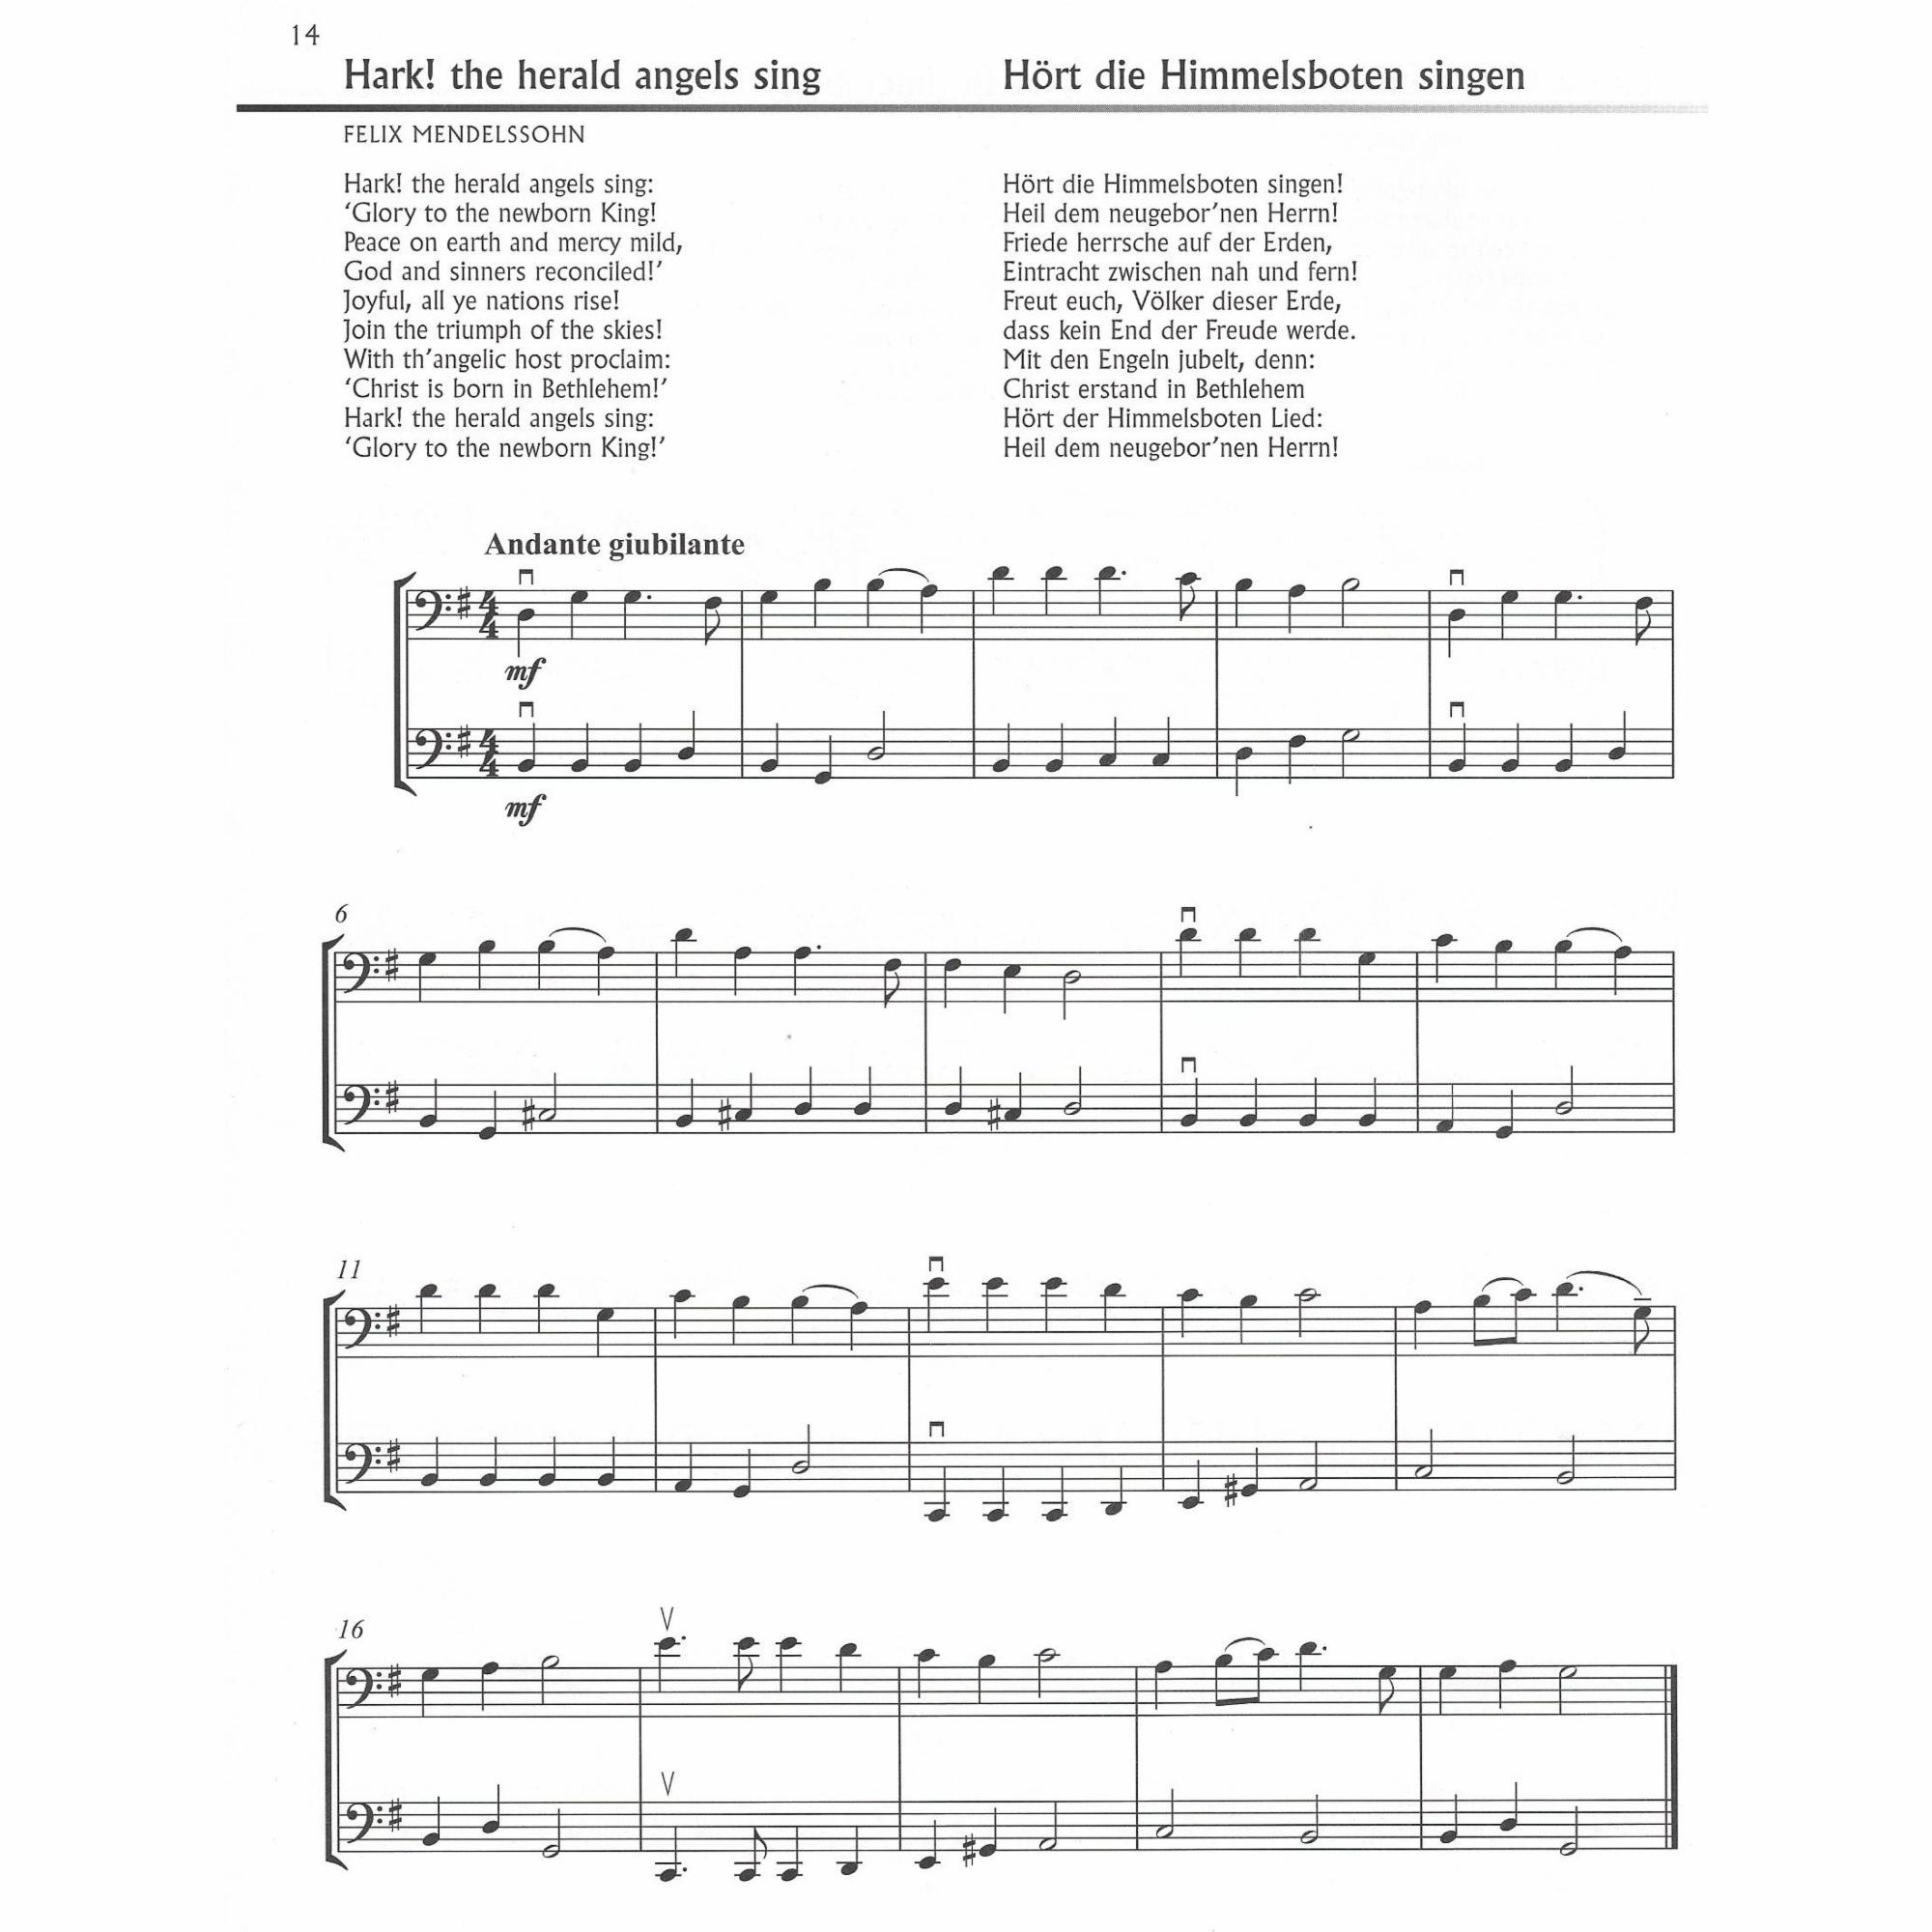 Sample: Two Cellos (Pg. 14)